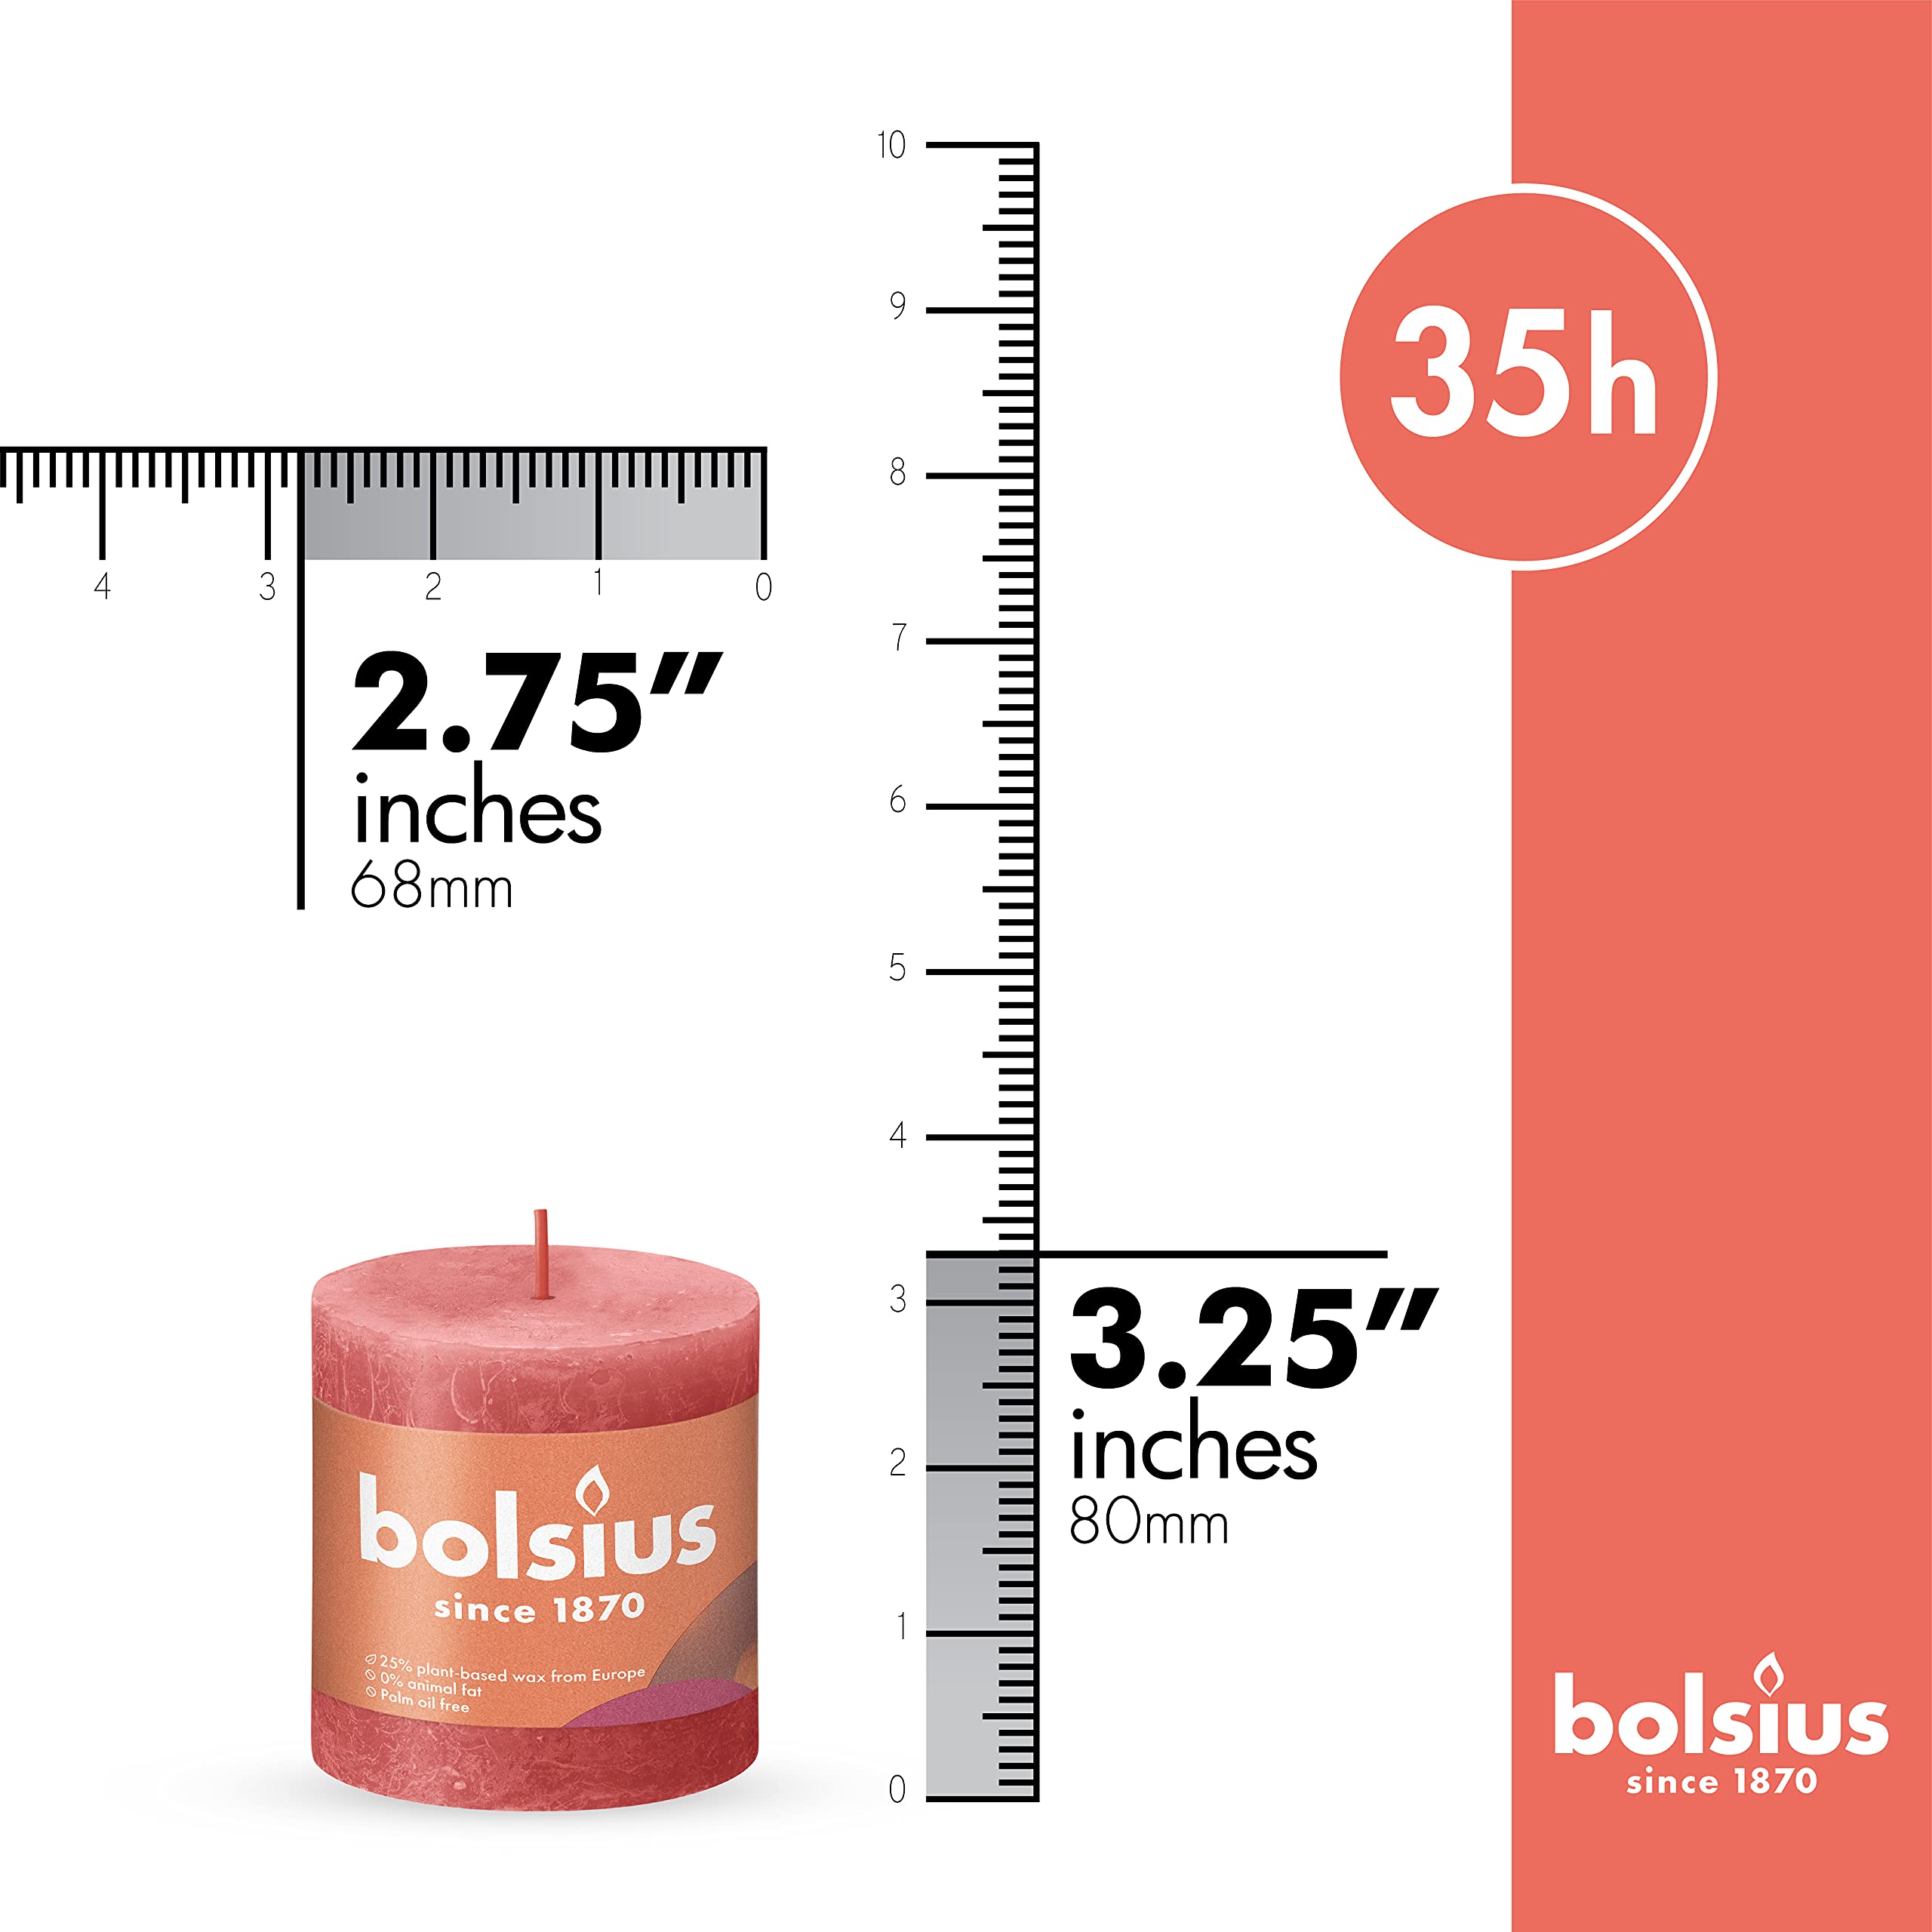 BOLSIUS Pillar Candles - Premium European Quality - Natural Eco-Friendly Plant-Based Wax - Unscented Dripless Smokeless  - Very Good